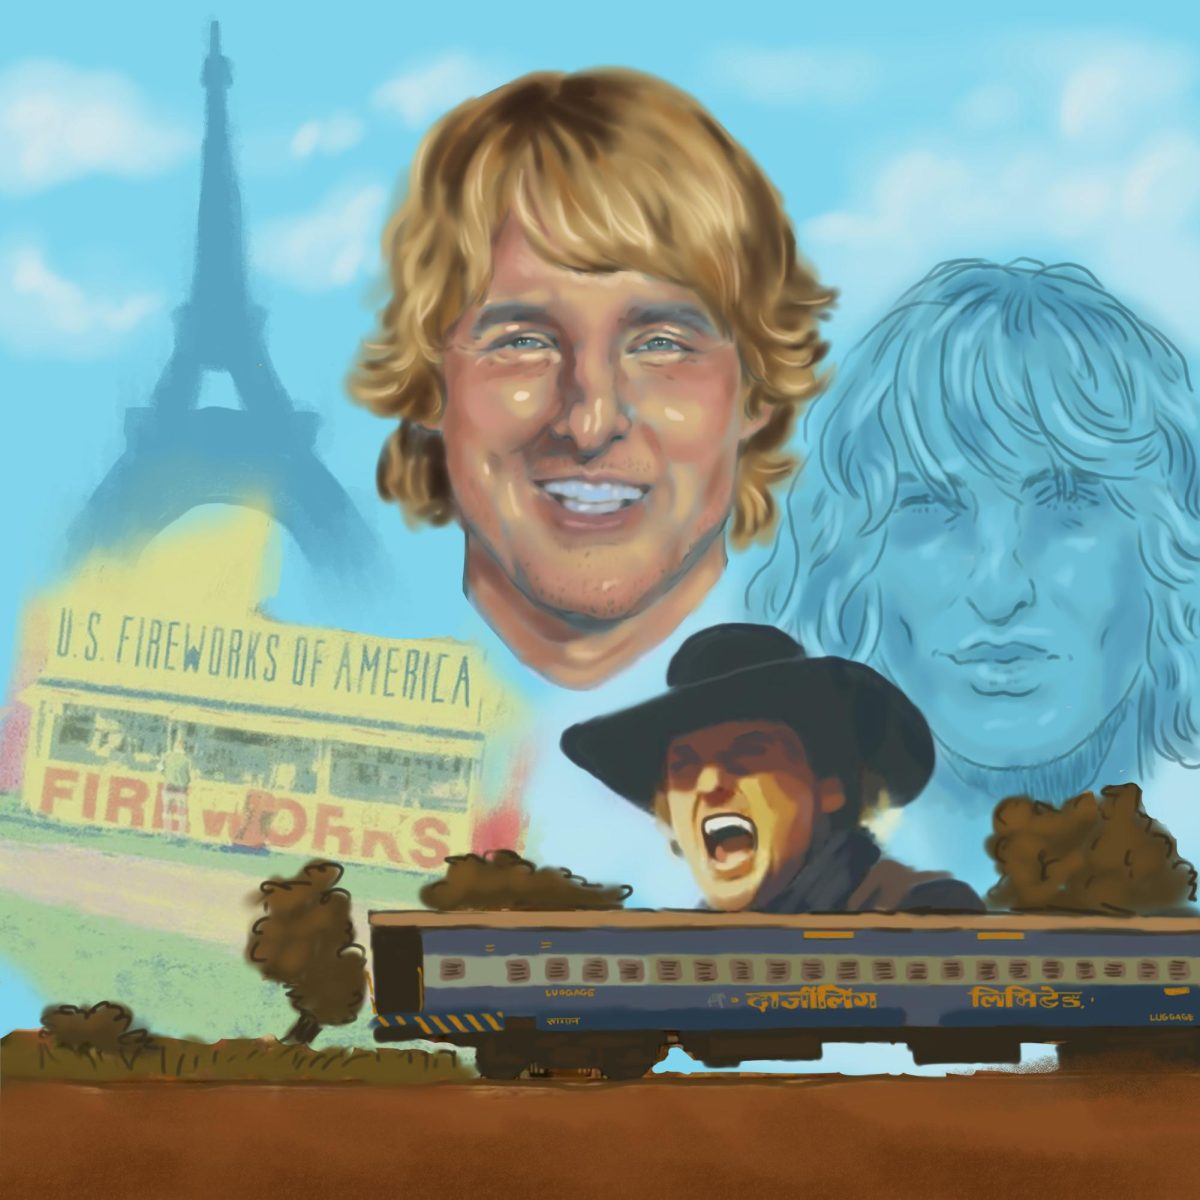 Owen Wilson films to watch to distract from back-to-homework dread